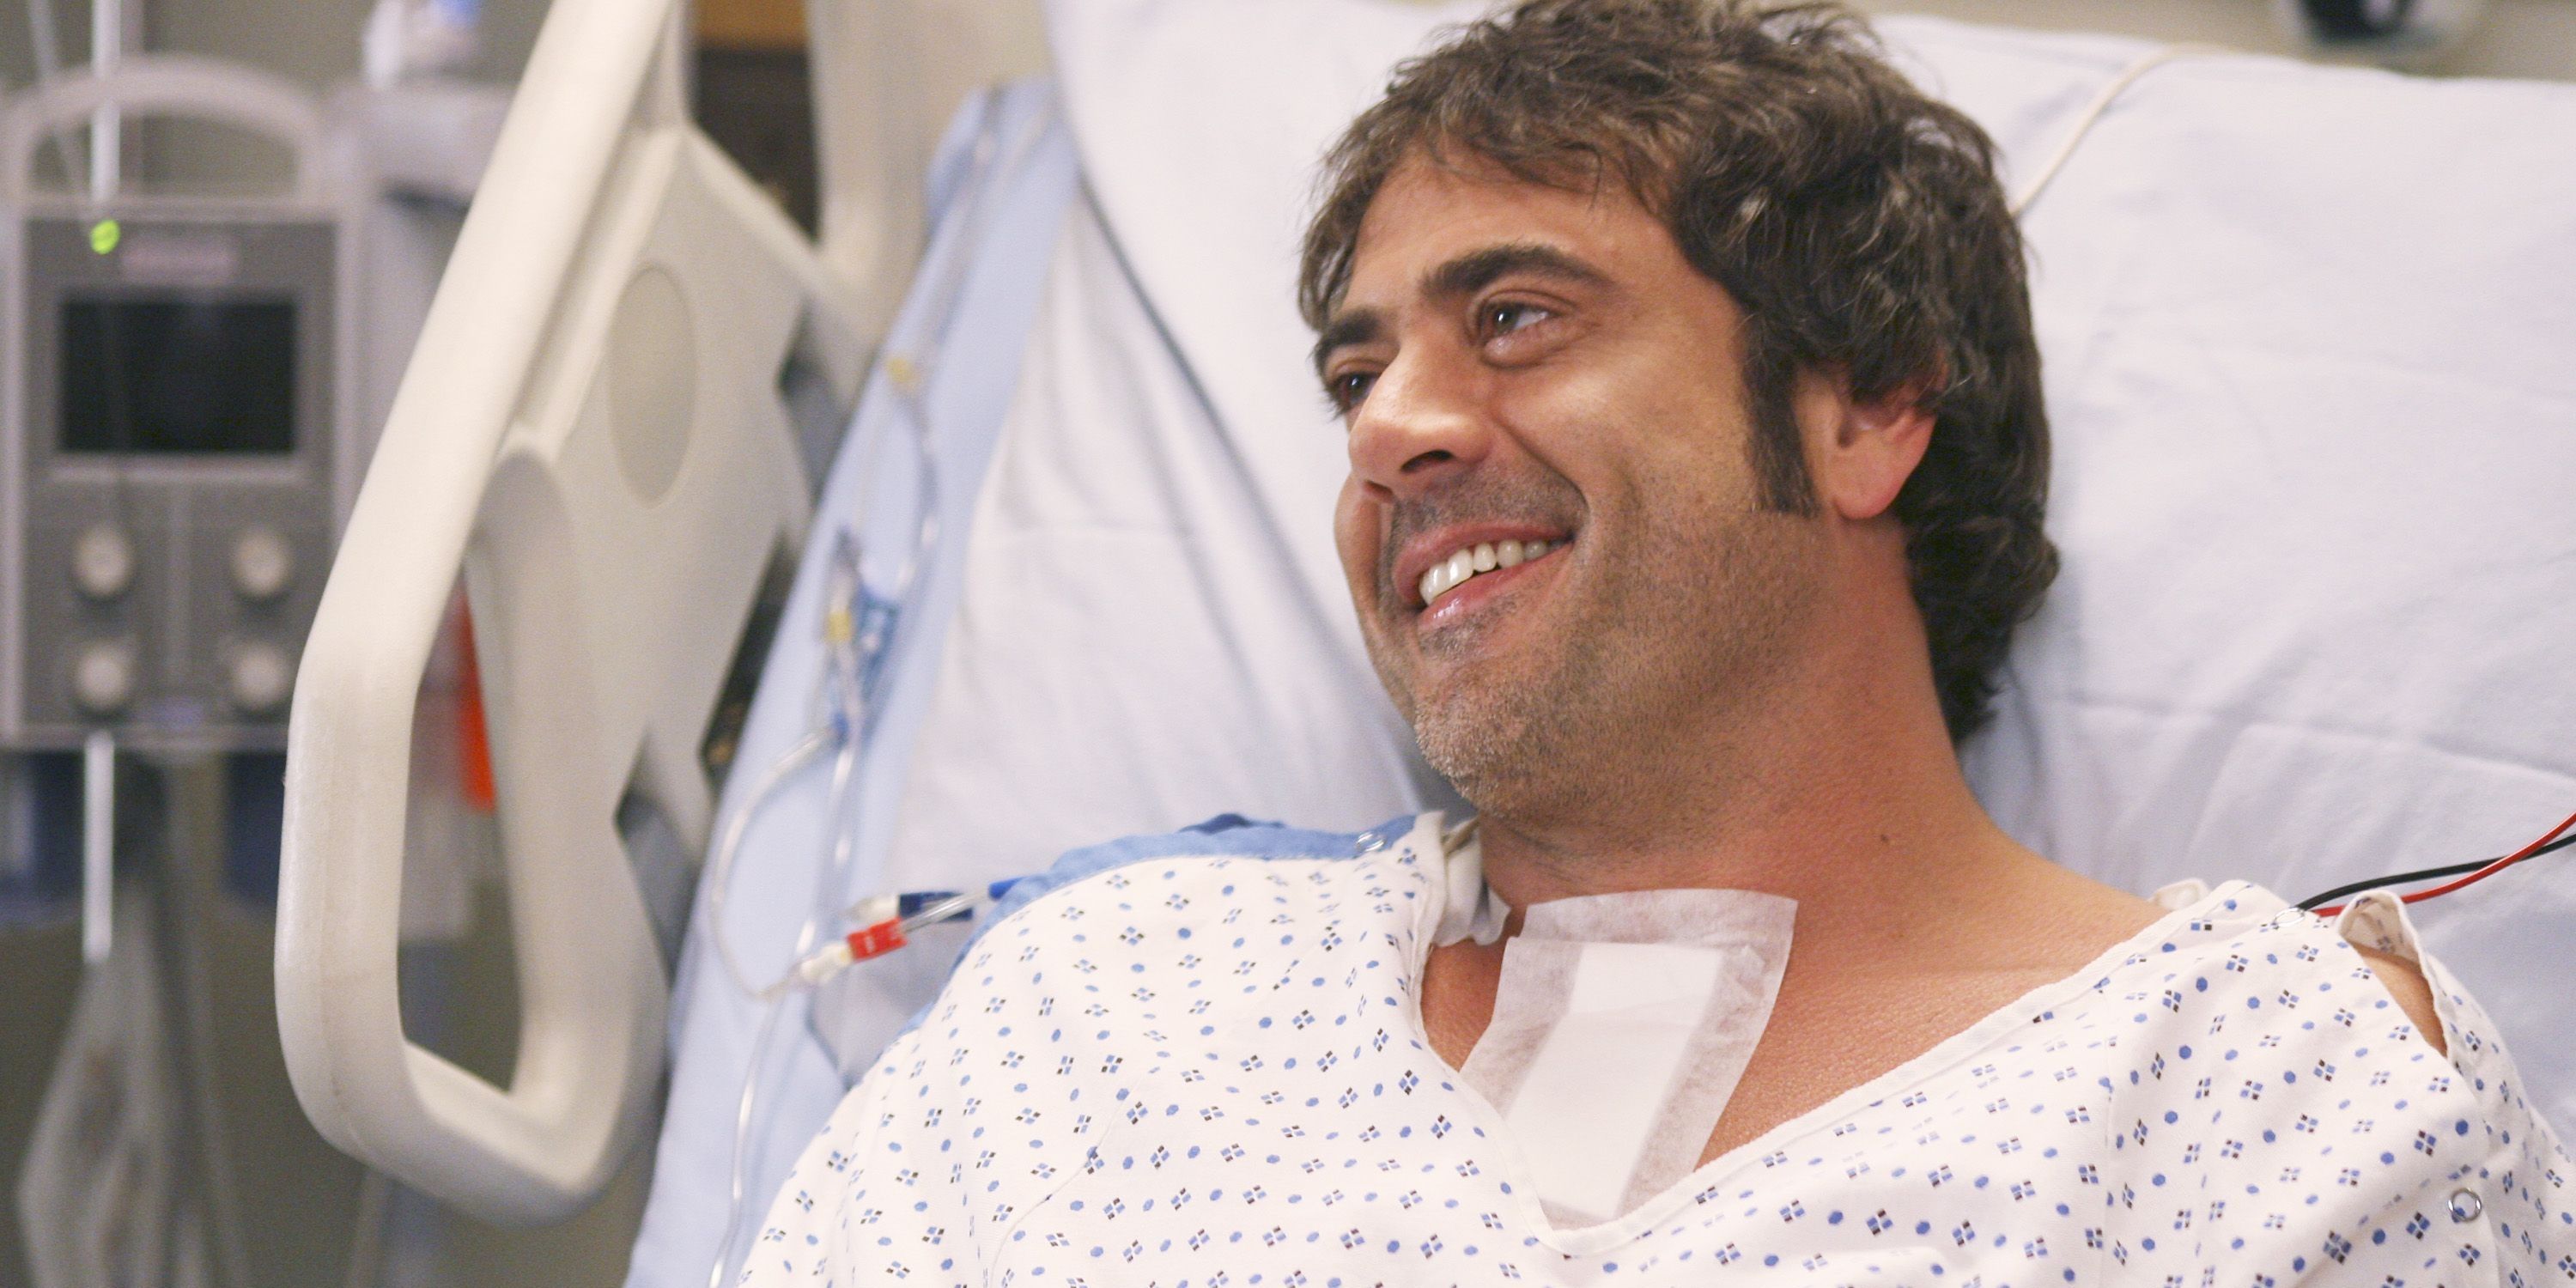 Denny Duquette flirts with Izzie after waking up from a coma in Grey's Anatomy